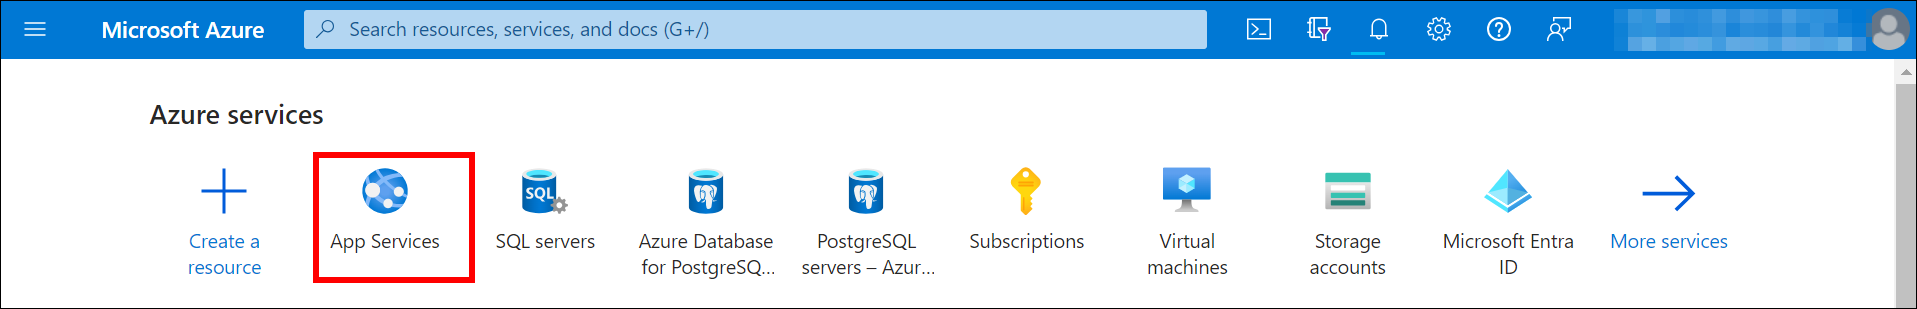 azure-home-page